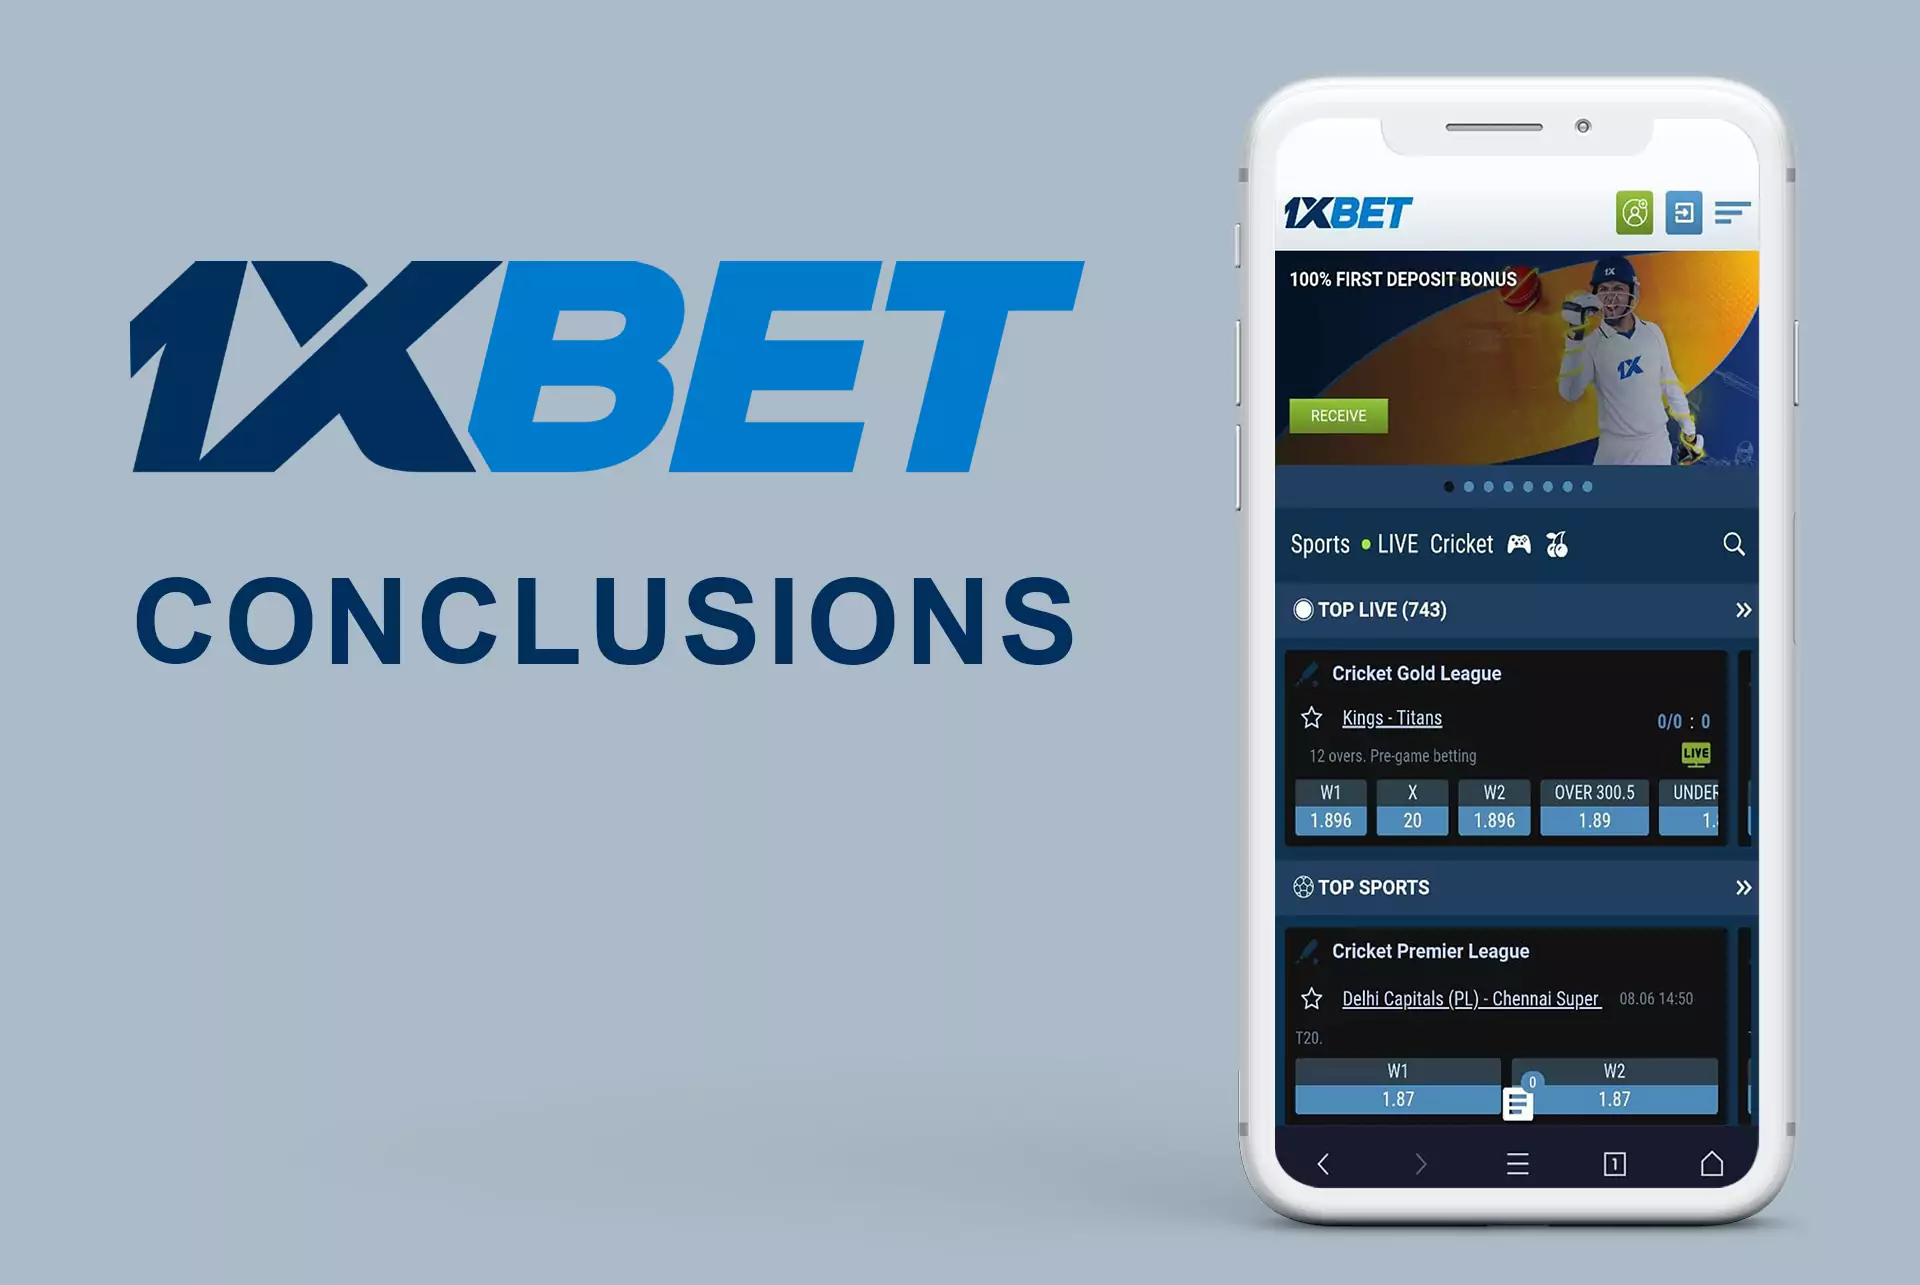 Read the conclusions about the quality of the 1xBet app for Android and iOS.